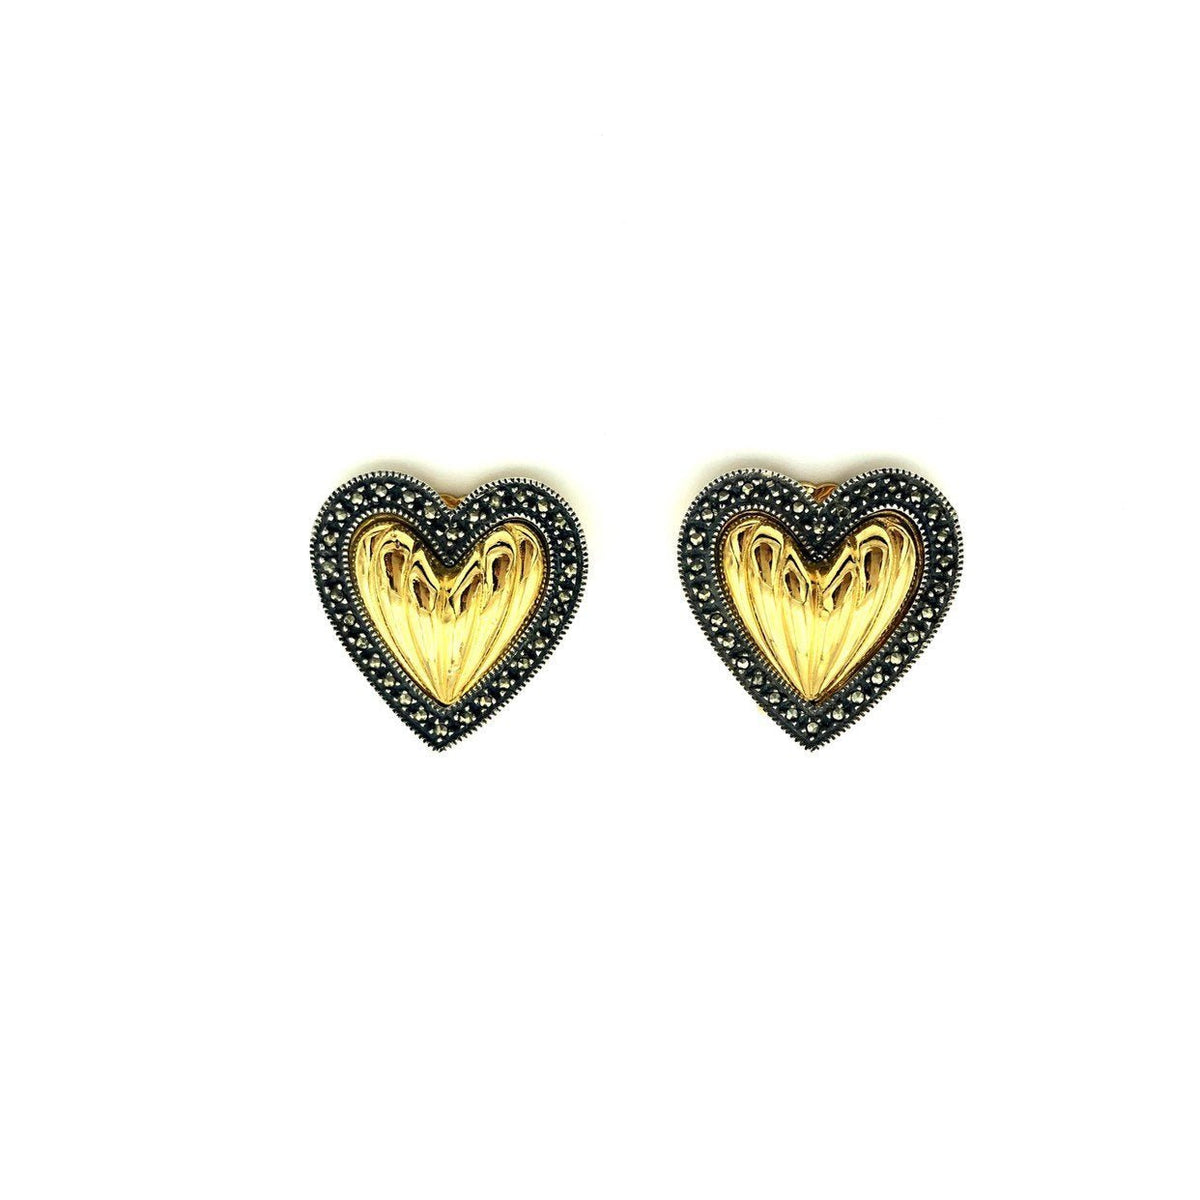 Gold Judith Jack Puffy Heart Sterling Vintage Clip-On Earrings - 24 Wishes Vintage Jewelry